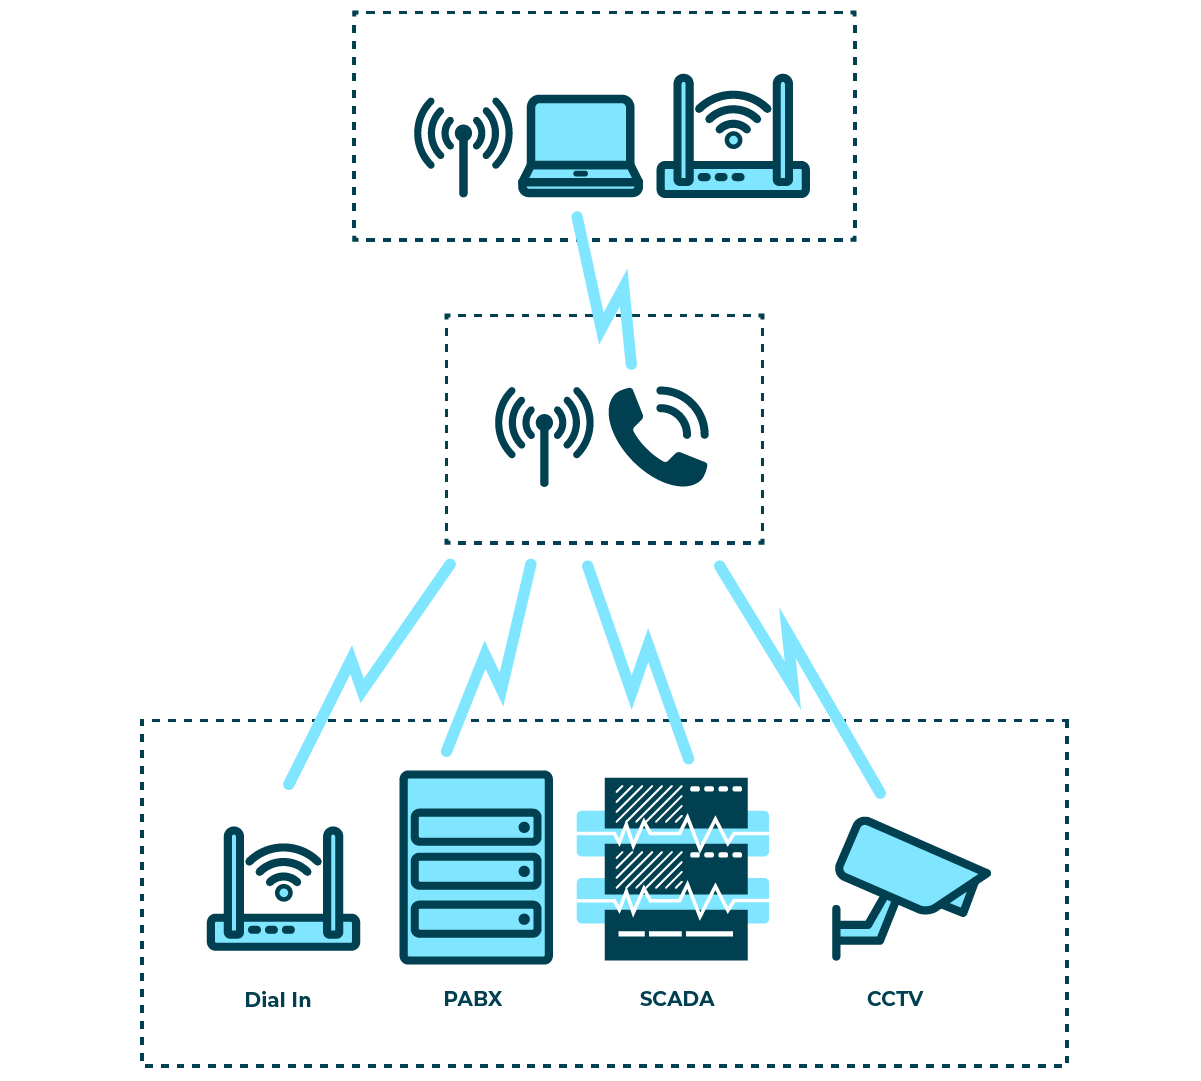 Simple diagram showing technologies that interface with PSTN: Dial in, PABX, SCADA, CCTV.